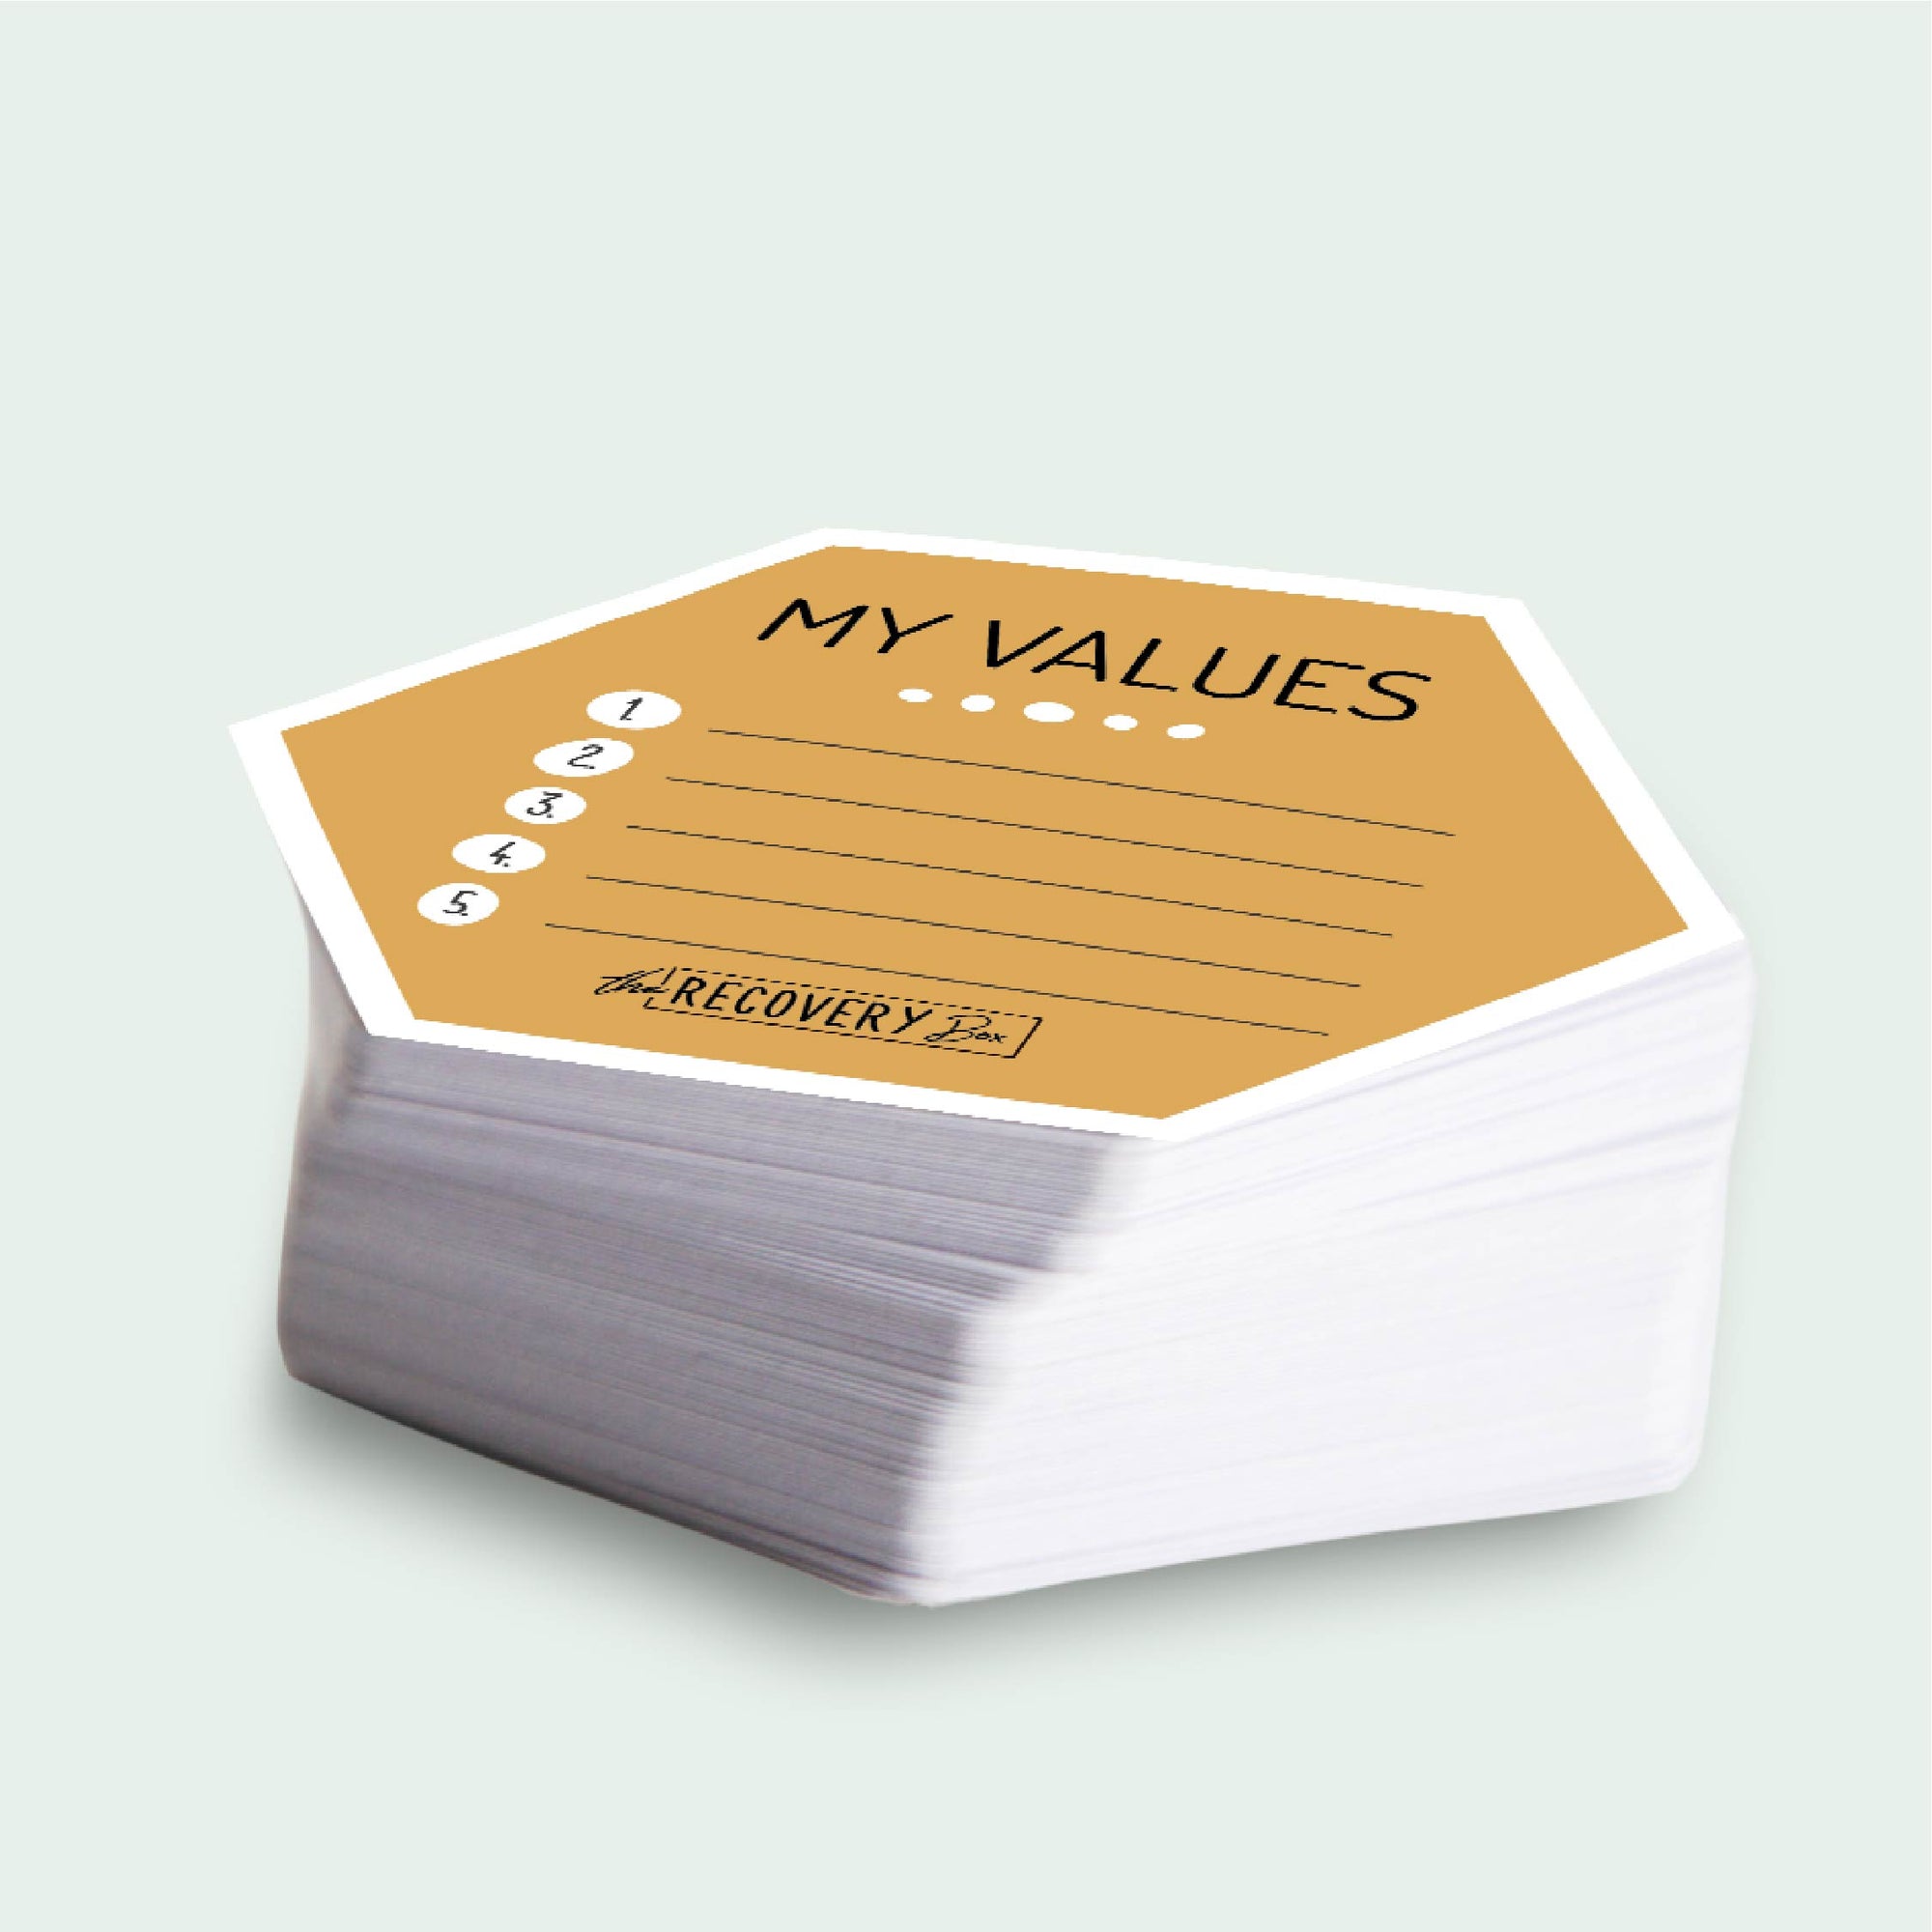 The Values Deck